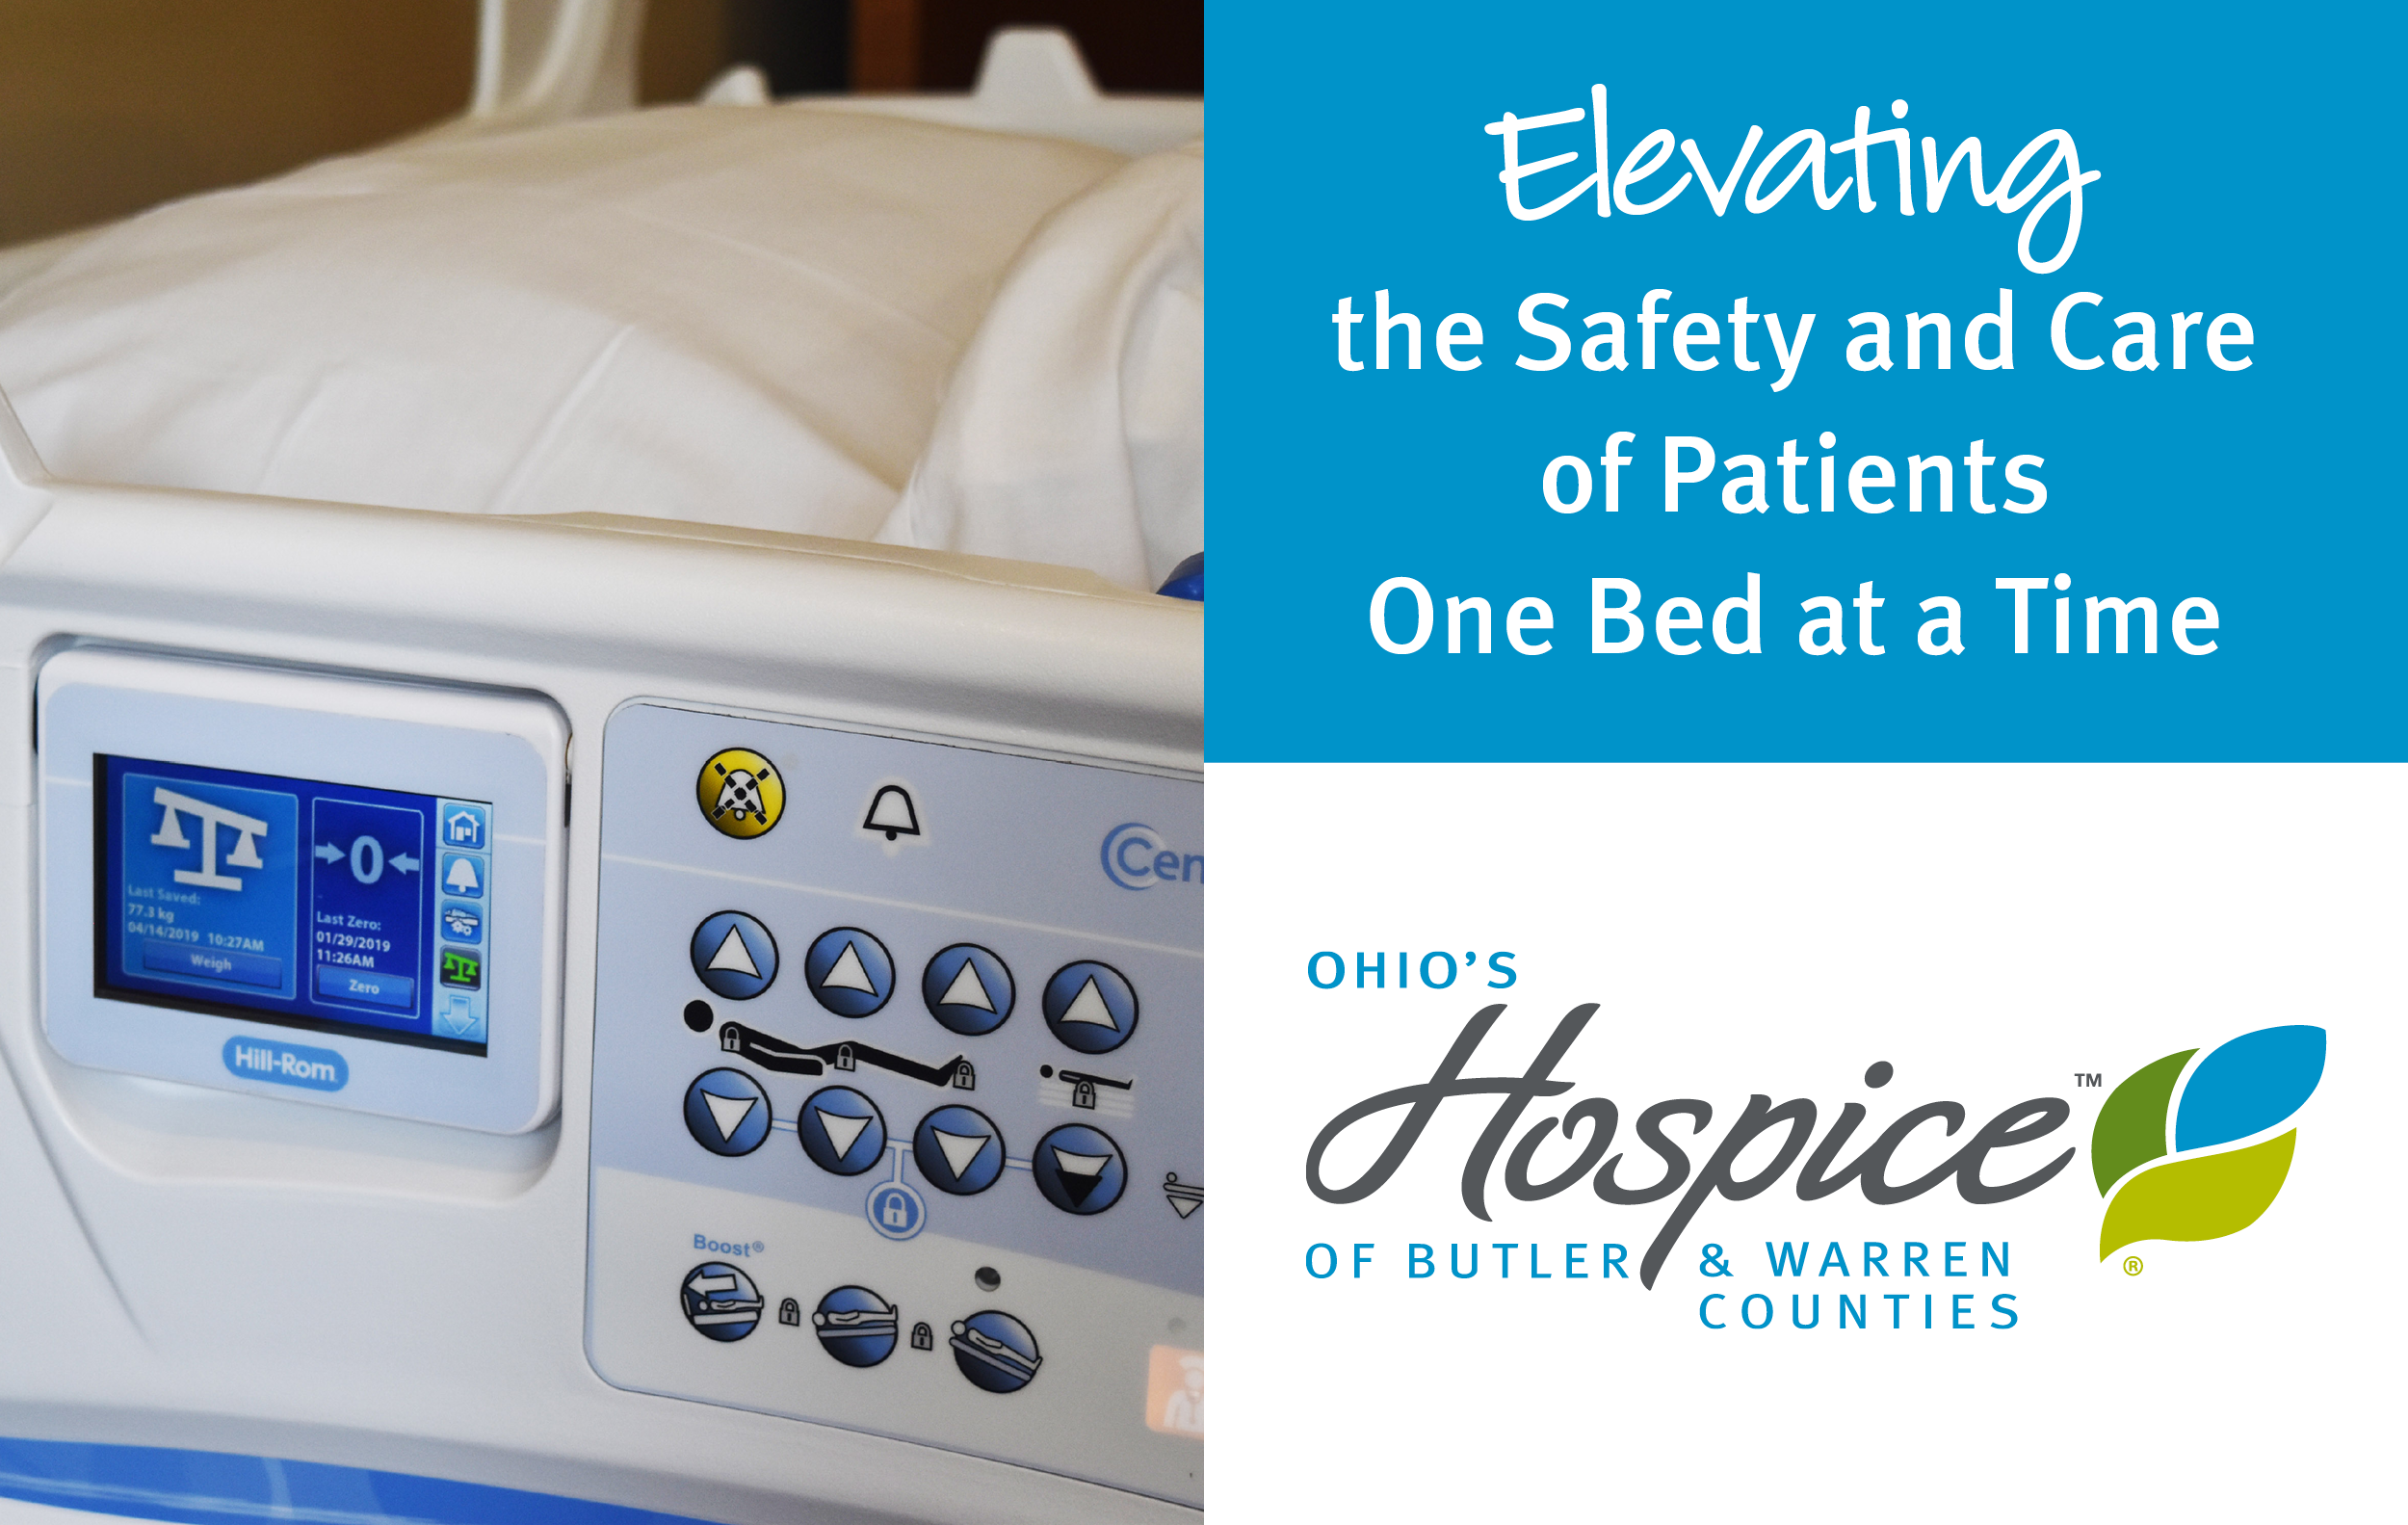 Elevating the Safety and Care of Patients One Bed at a Time